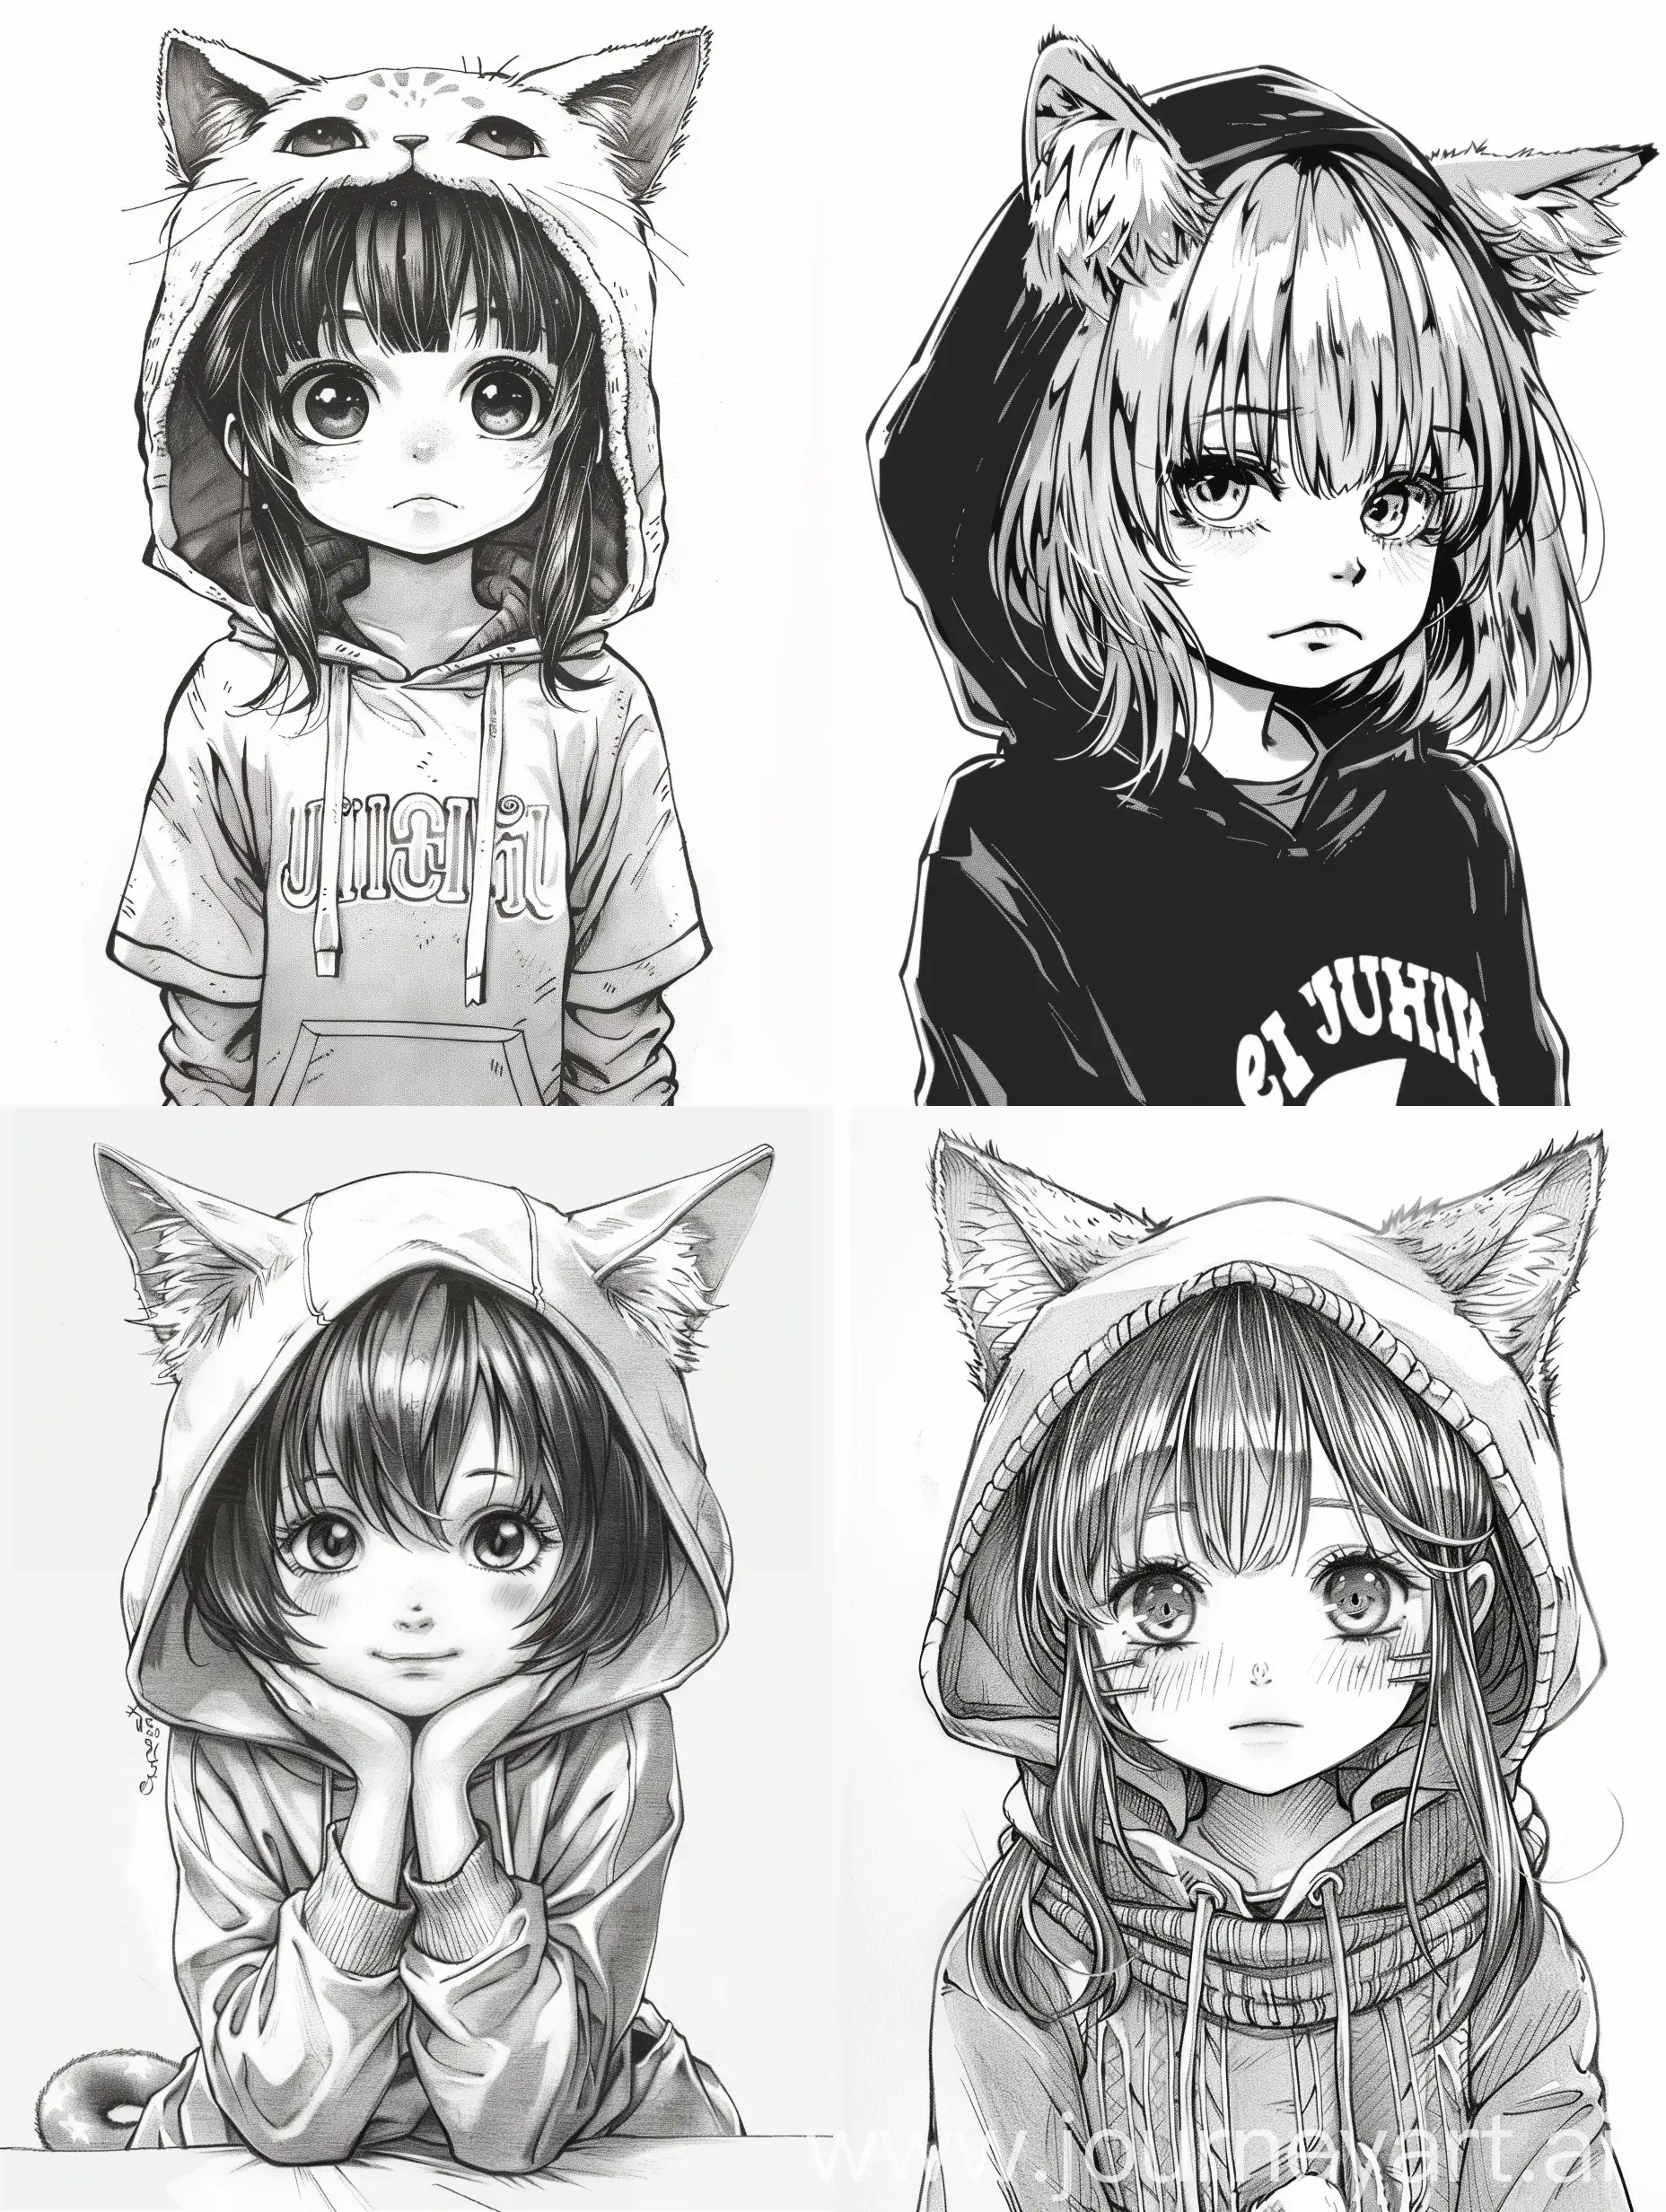 very cute girl 6 years old waring a har with cat ears, manga style like junji ito  but cute, monochrome colors